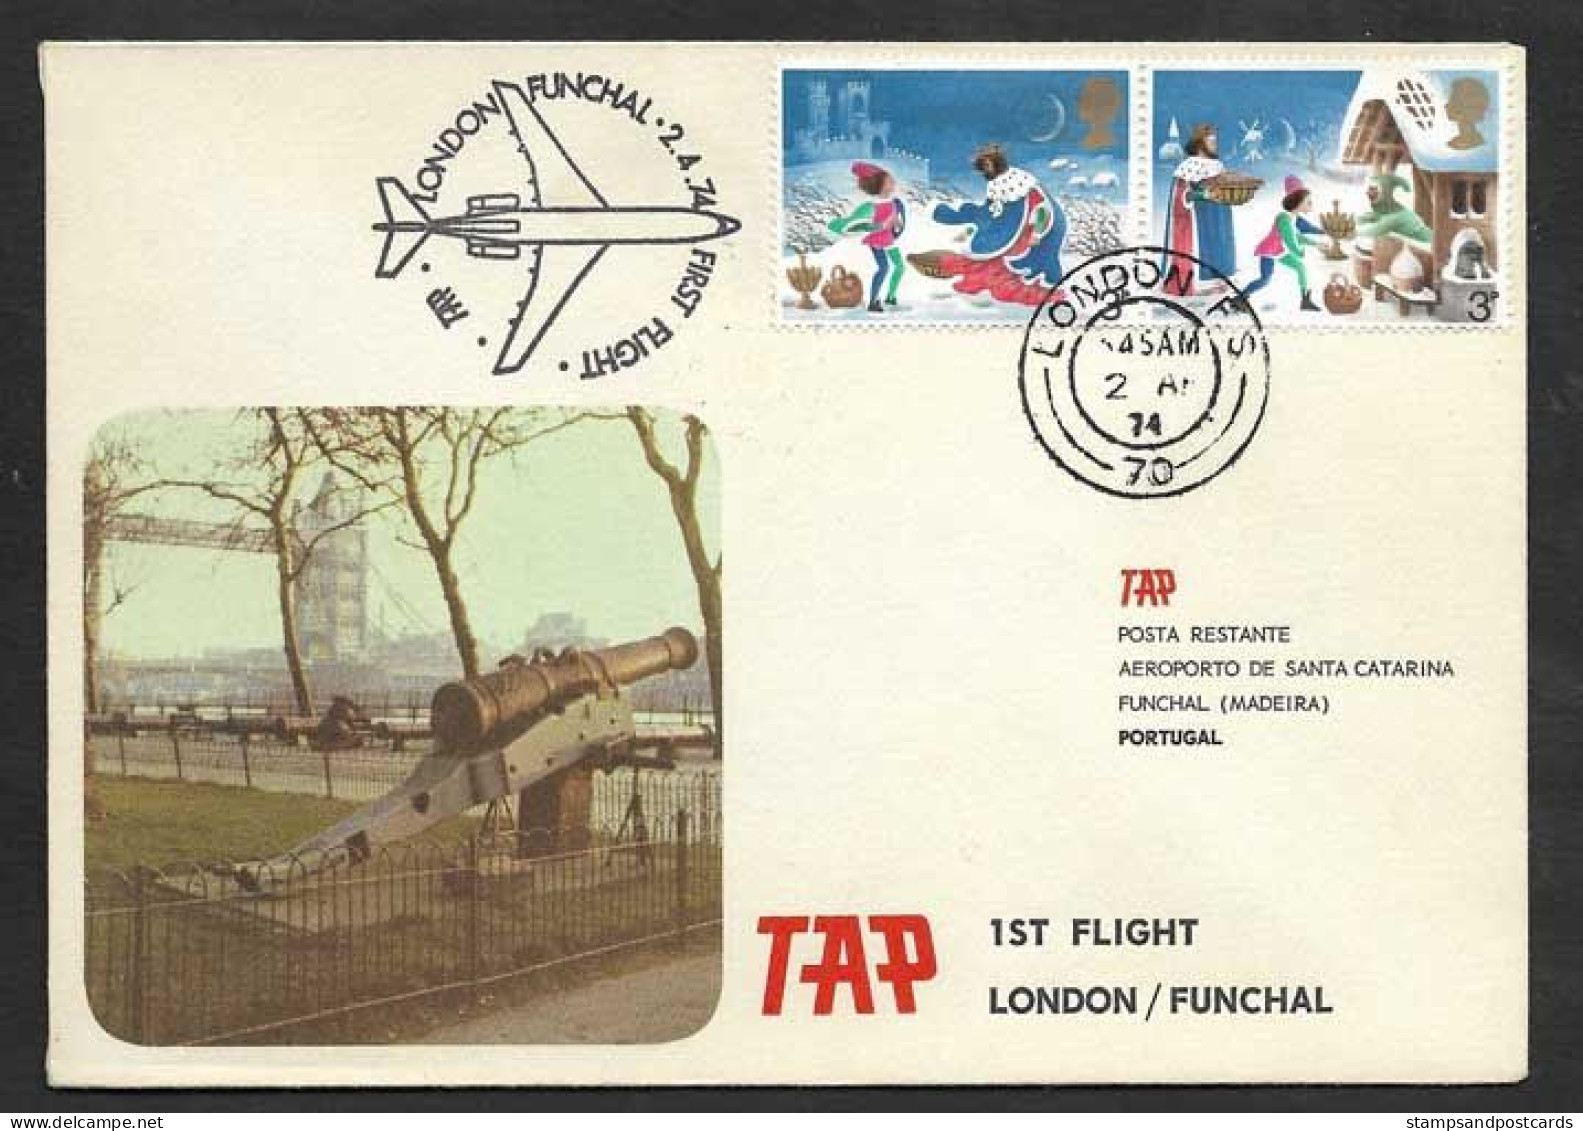 Portugal Premier Vol TAP Funchal Madère Londres Royaume Uni 1974 First Flight Madeira London United Kingdom - Lettres & Documents